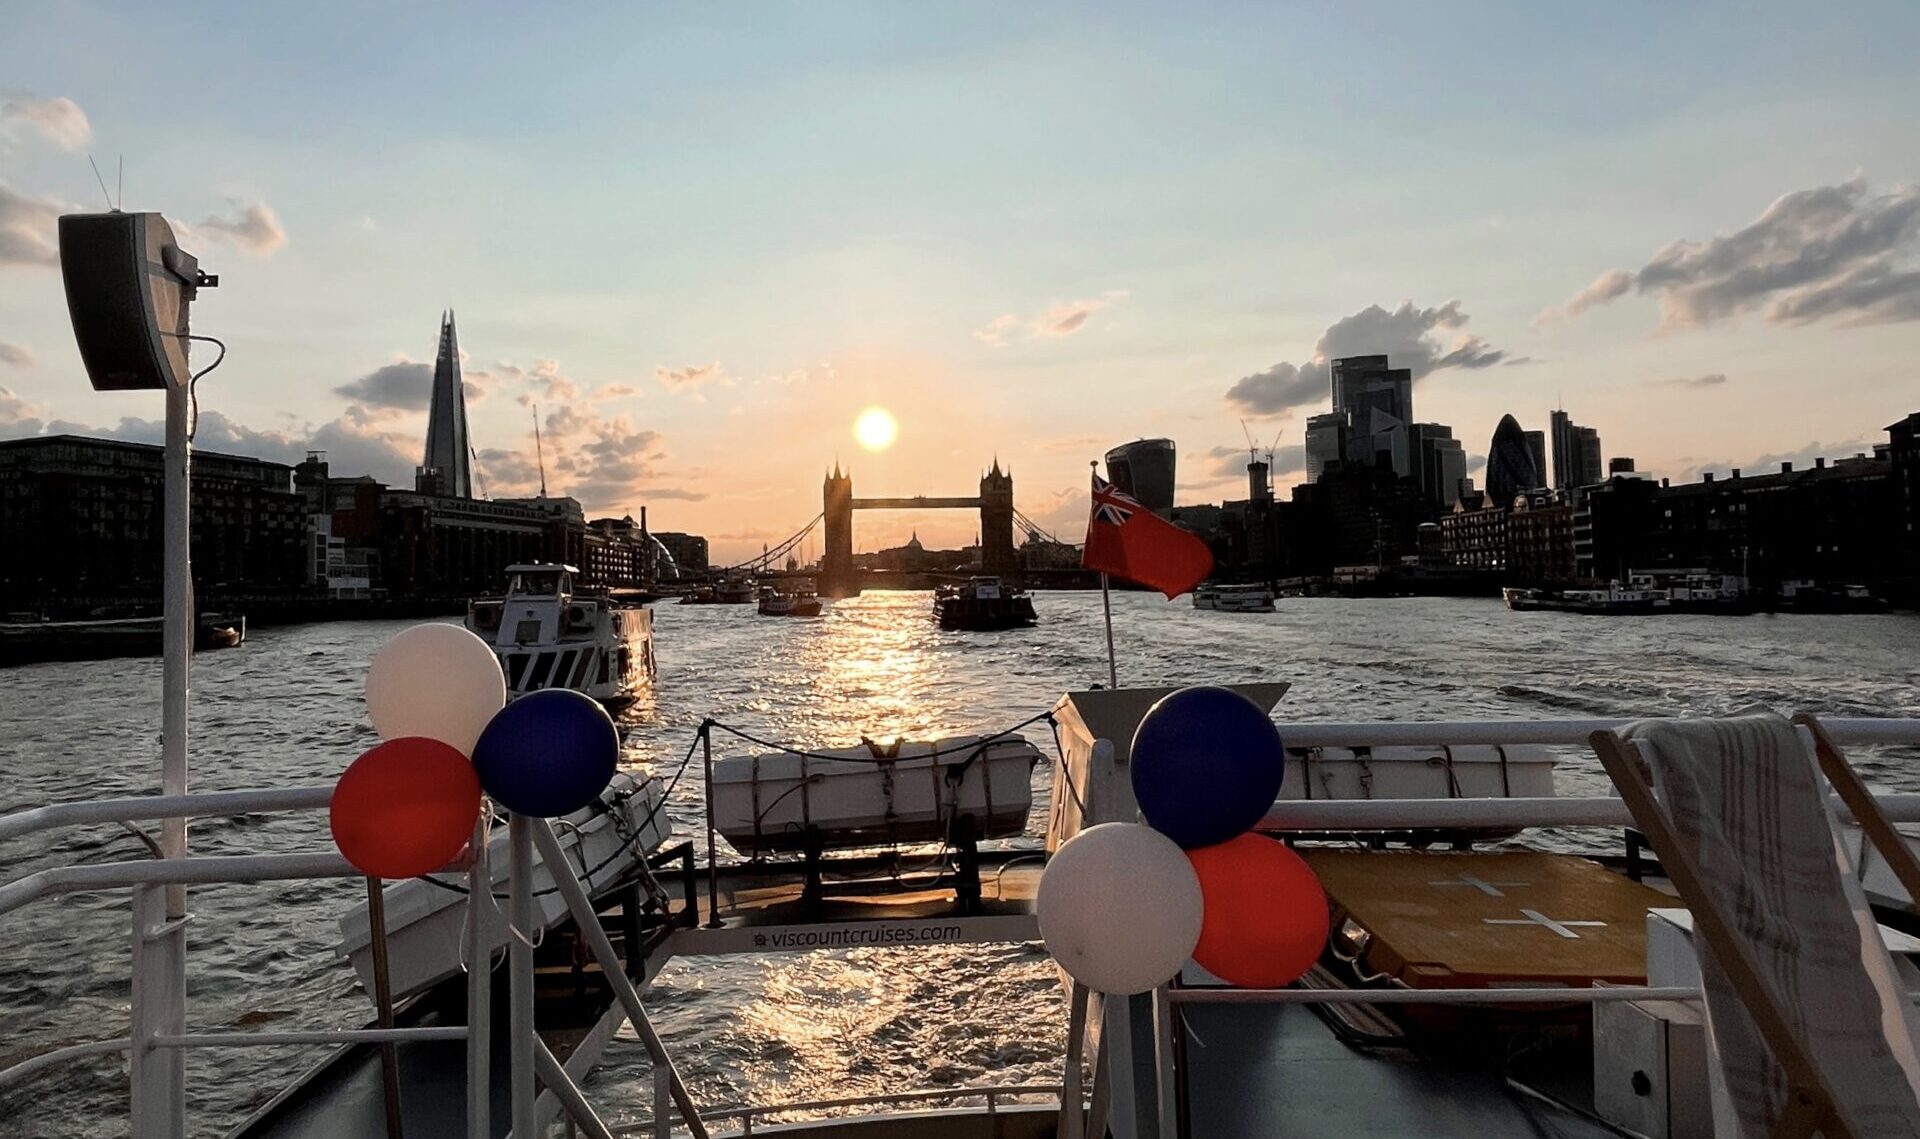 Tapestry-soho-retail-on-the-thames-wecomm-group-retail-fashion-beauty-event-london-networking-summer-bbq-featured-speakers-private-fundraising-shooting-stars-childrens-hospice-sales-trends-professionals